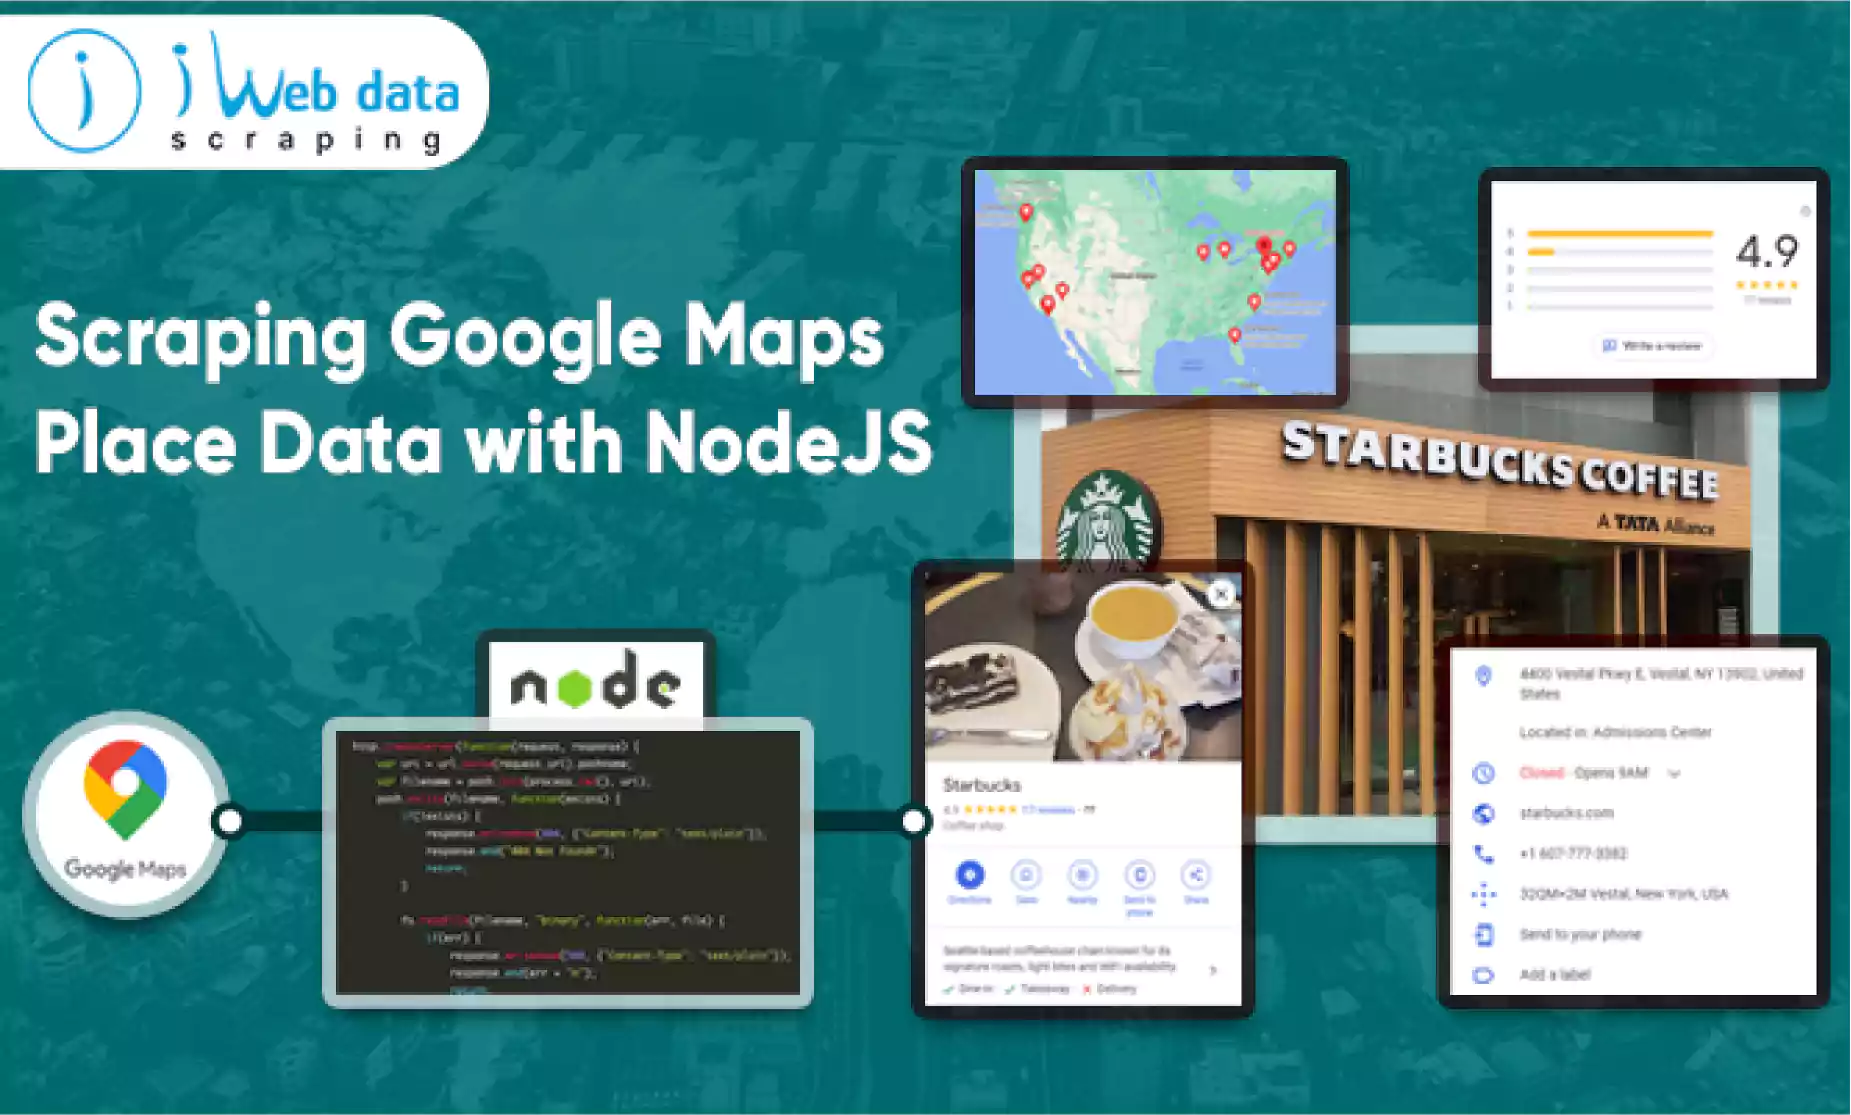 img/Scraping-Google-Maps-Place-Data-with-NodeJS/thumb-Scraping-Google-Maps-Place-Data-with-NodeJS.png